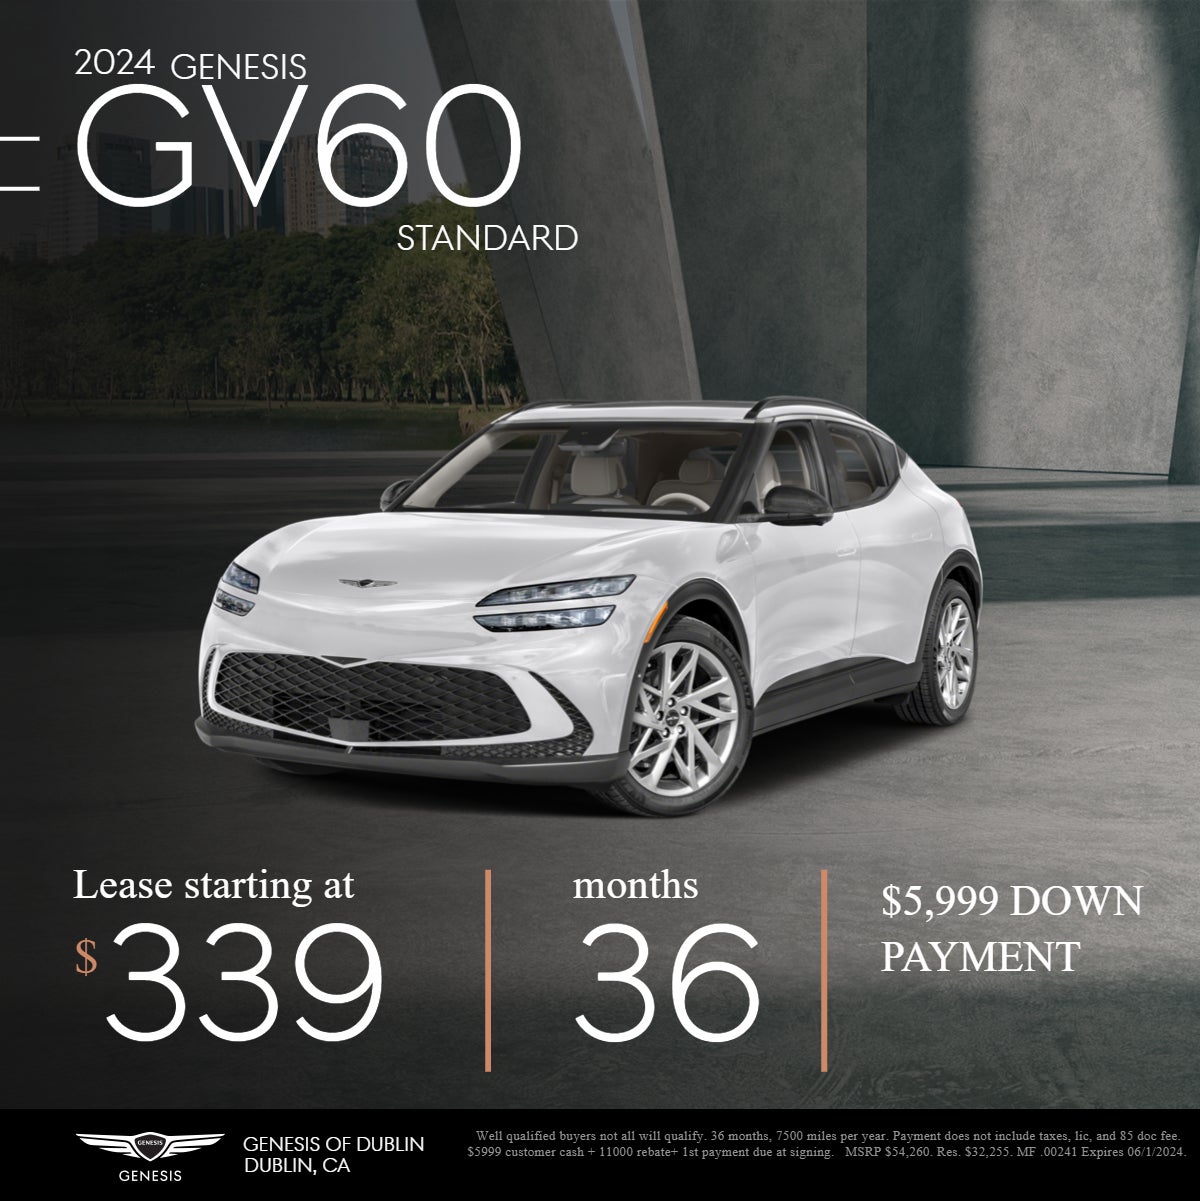 Lease a GV60 for $339 per month